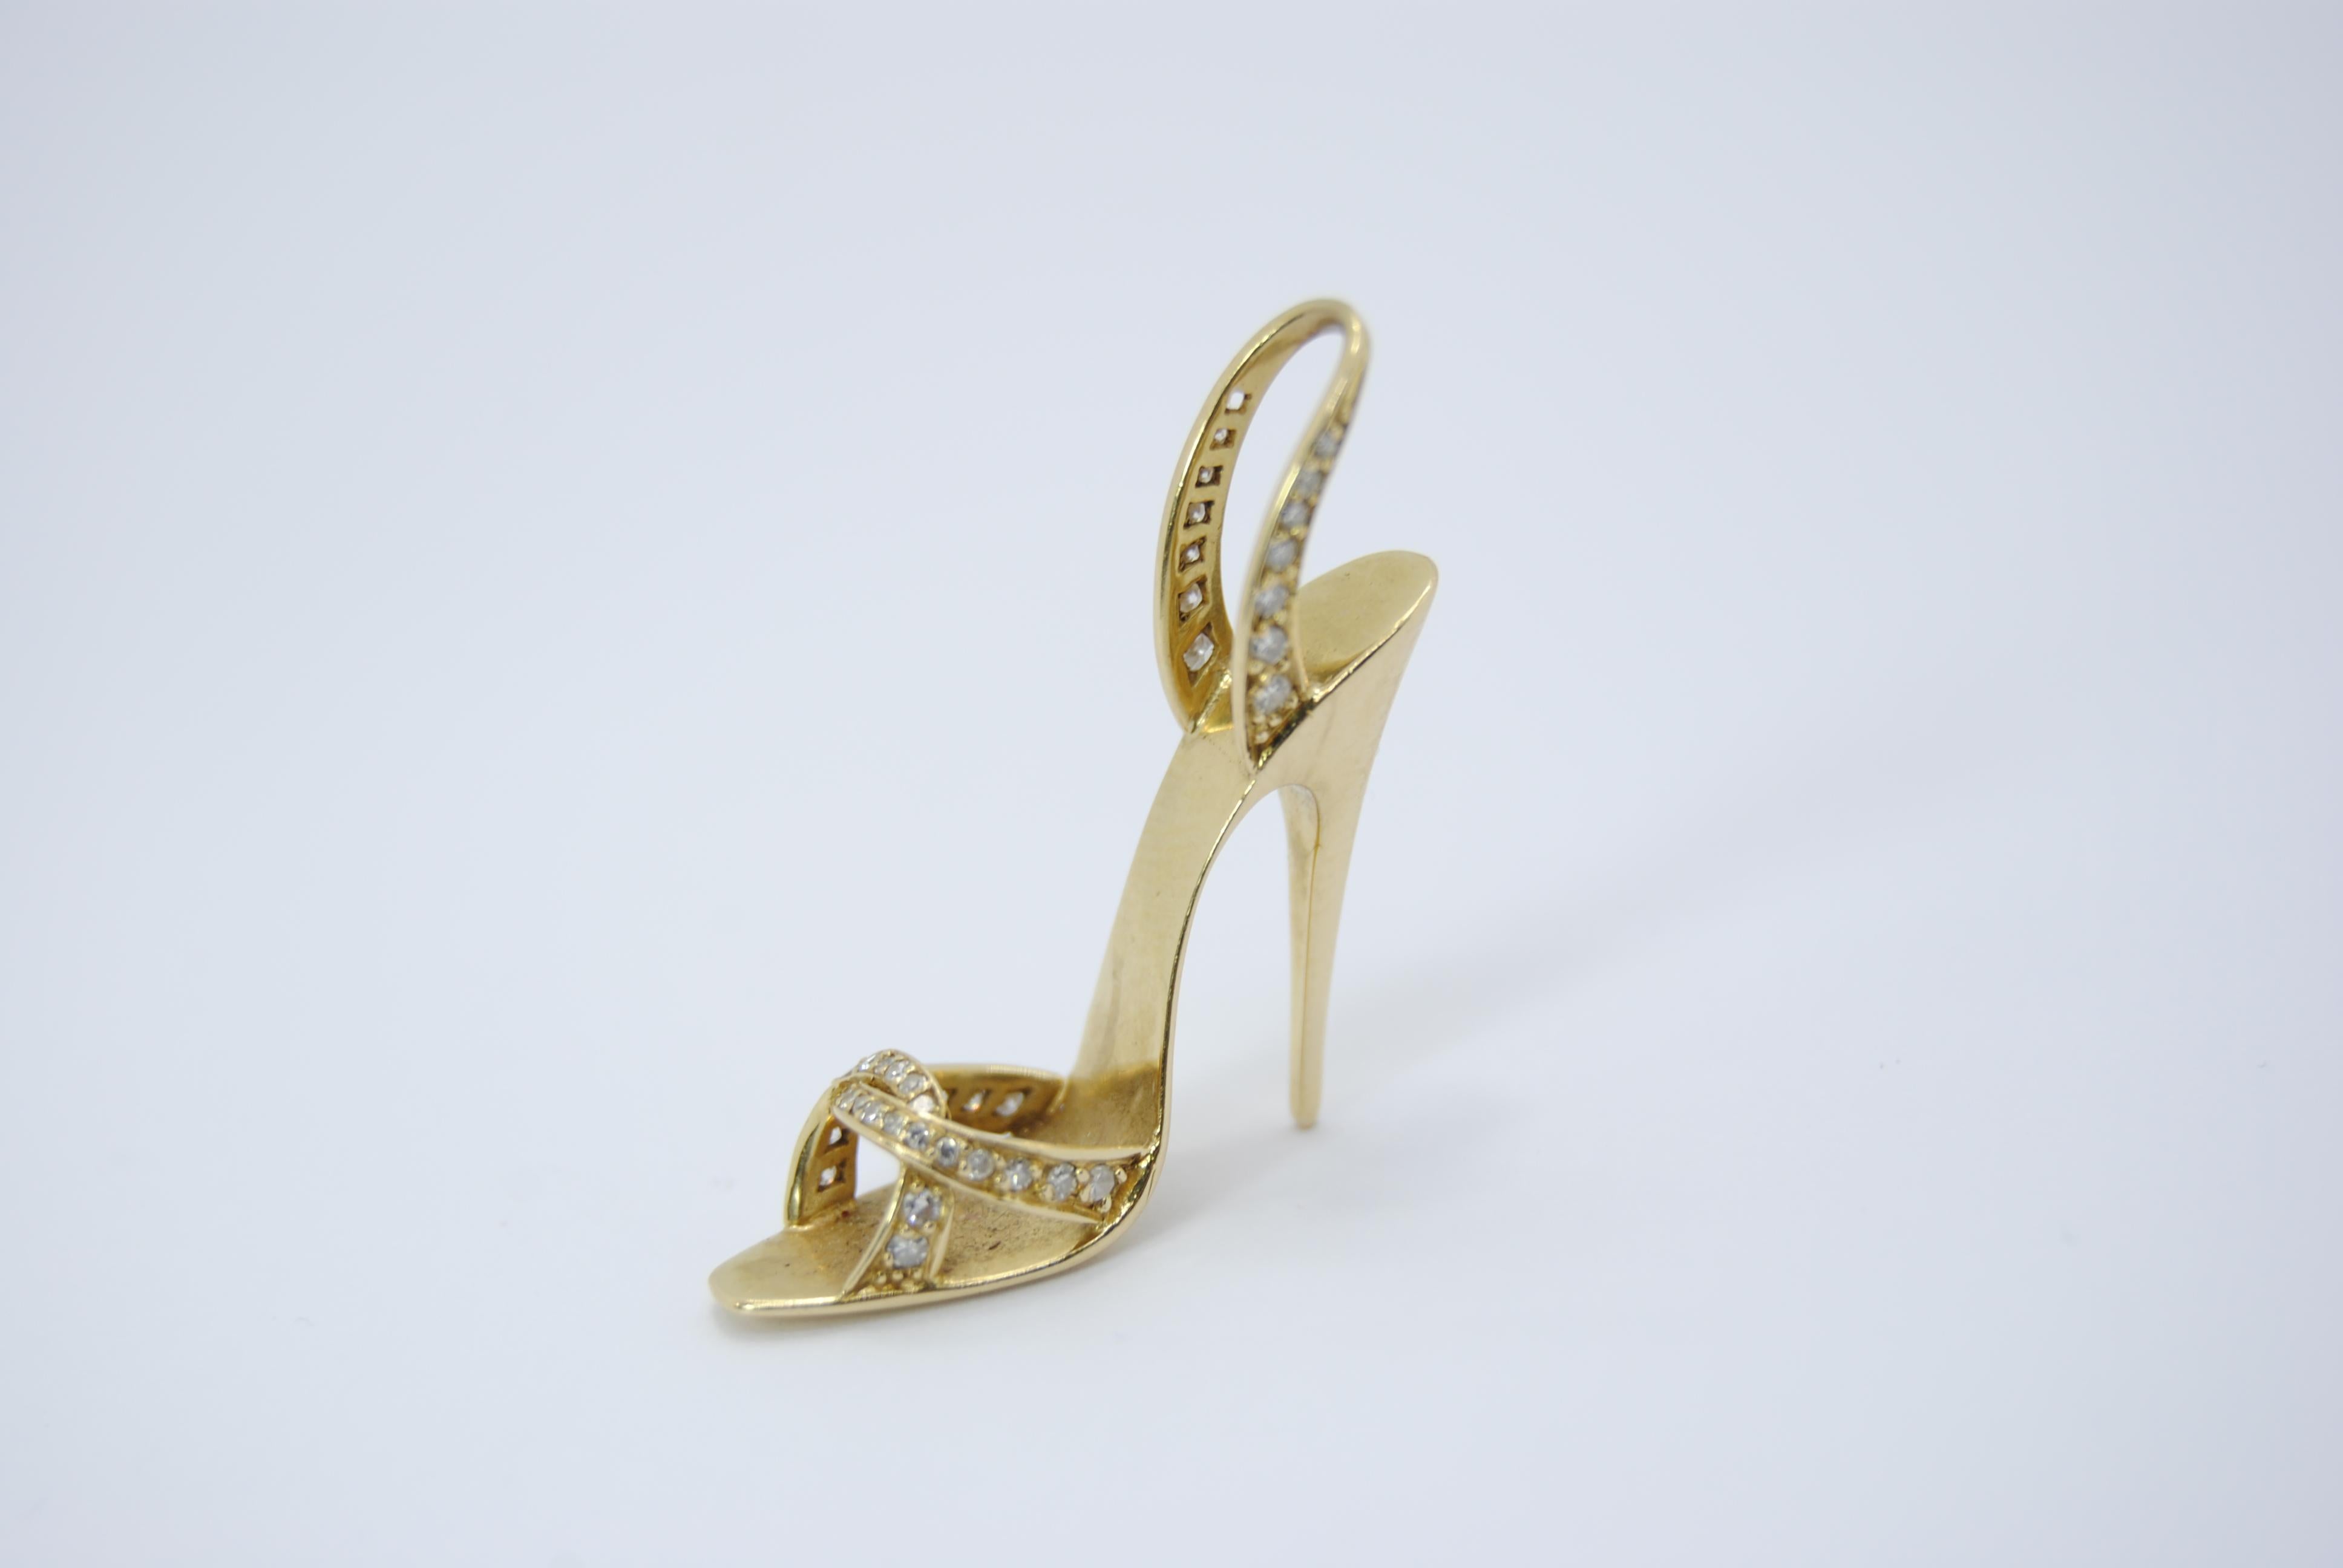 A princess design for princess lovers
Collectors piece 
Exquisite manufacture of heel and toes in diamonds 
6,7gr 